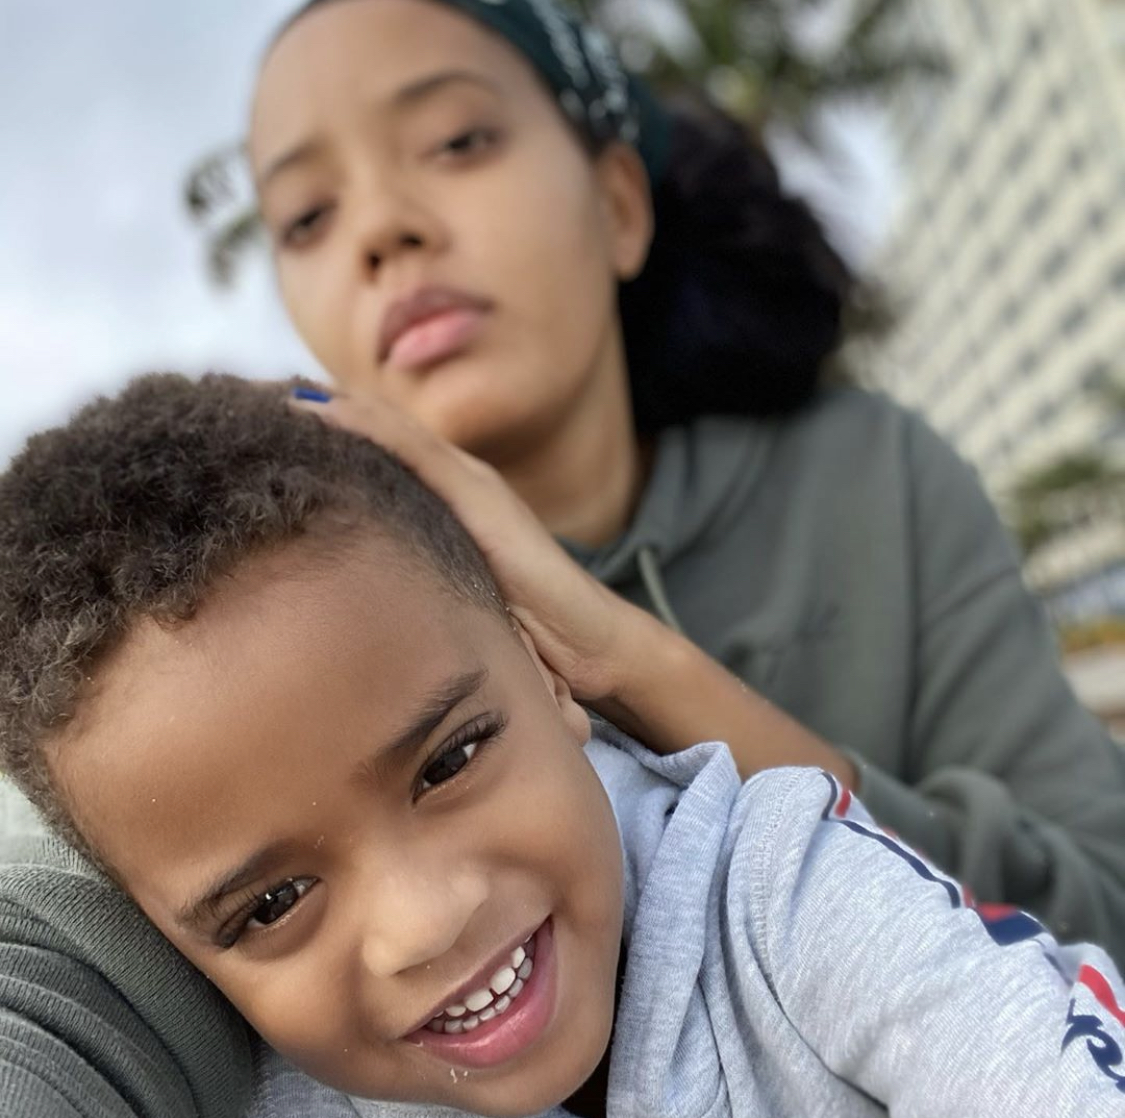 A Mothers Love Angela Simmons Shares New Images With Her 4 Year Old Son